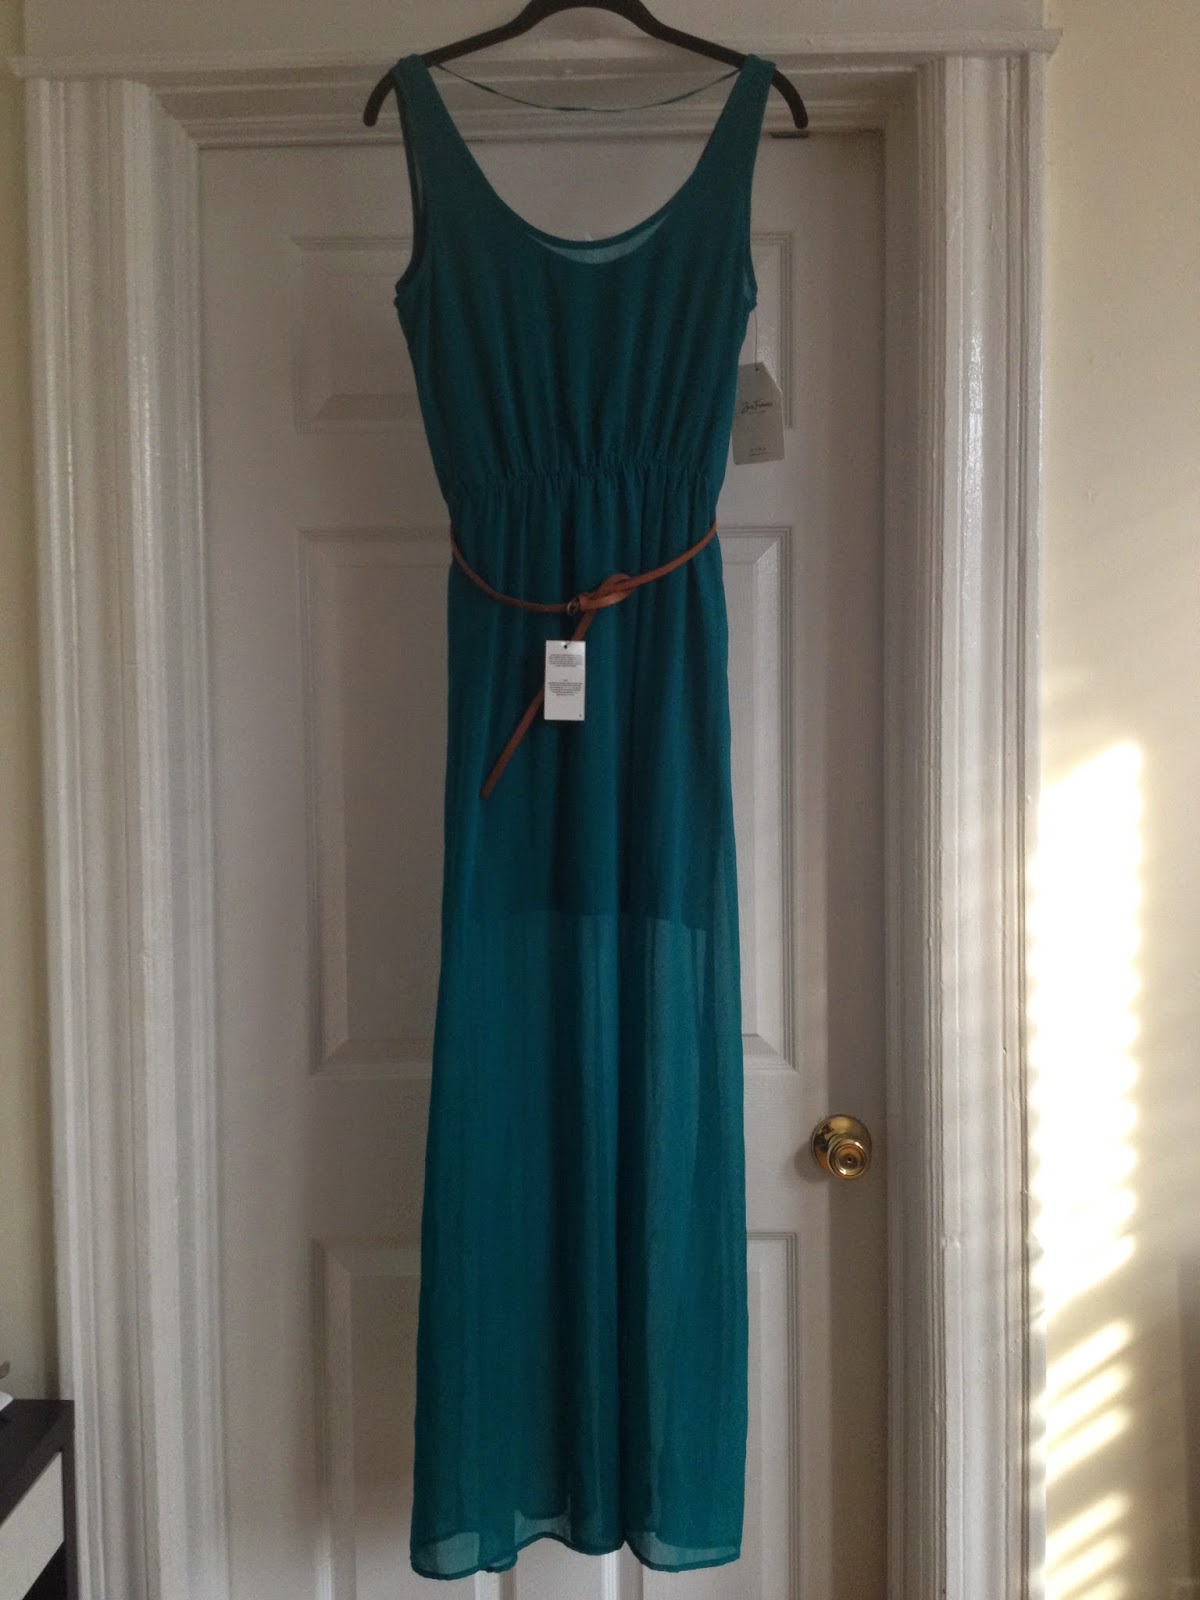 This Chica's Guide To...: For Sale | Zara Green Belted Maxi Dress